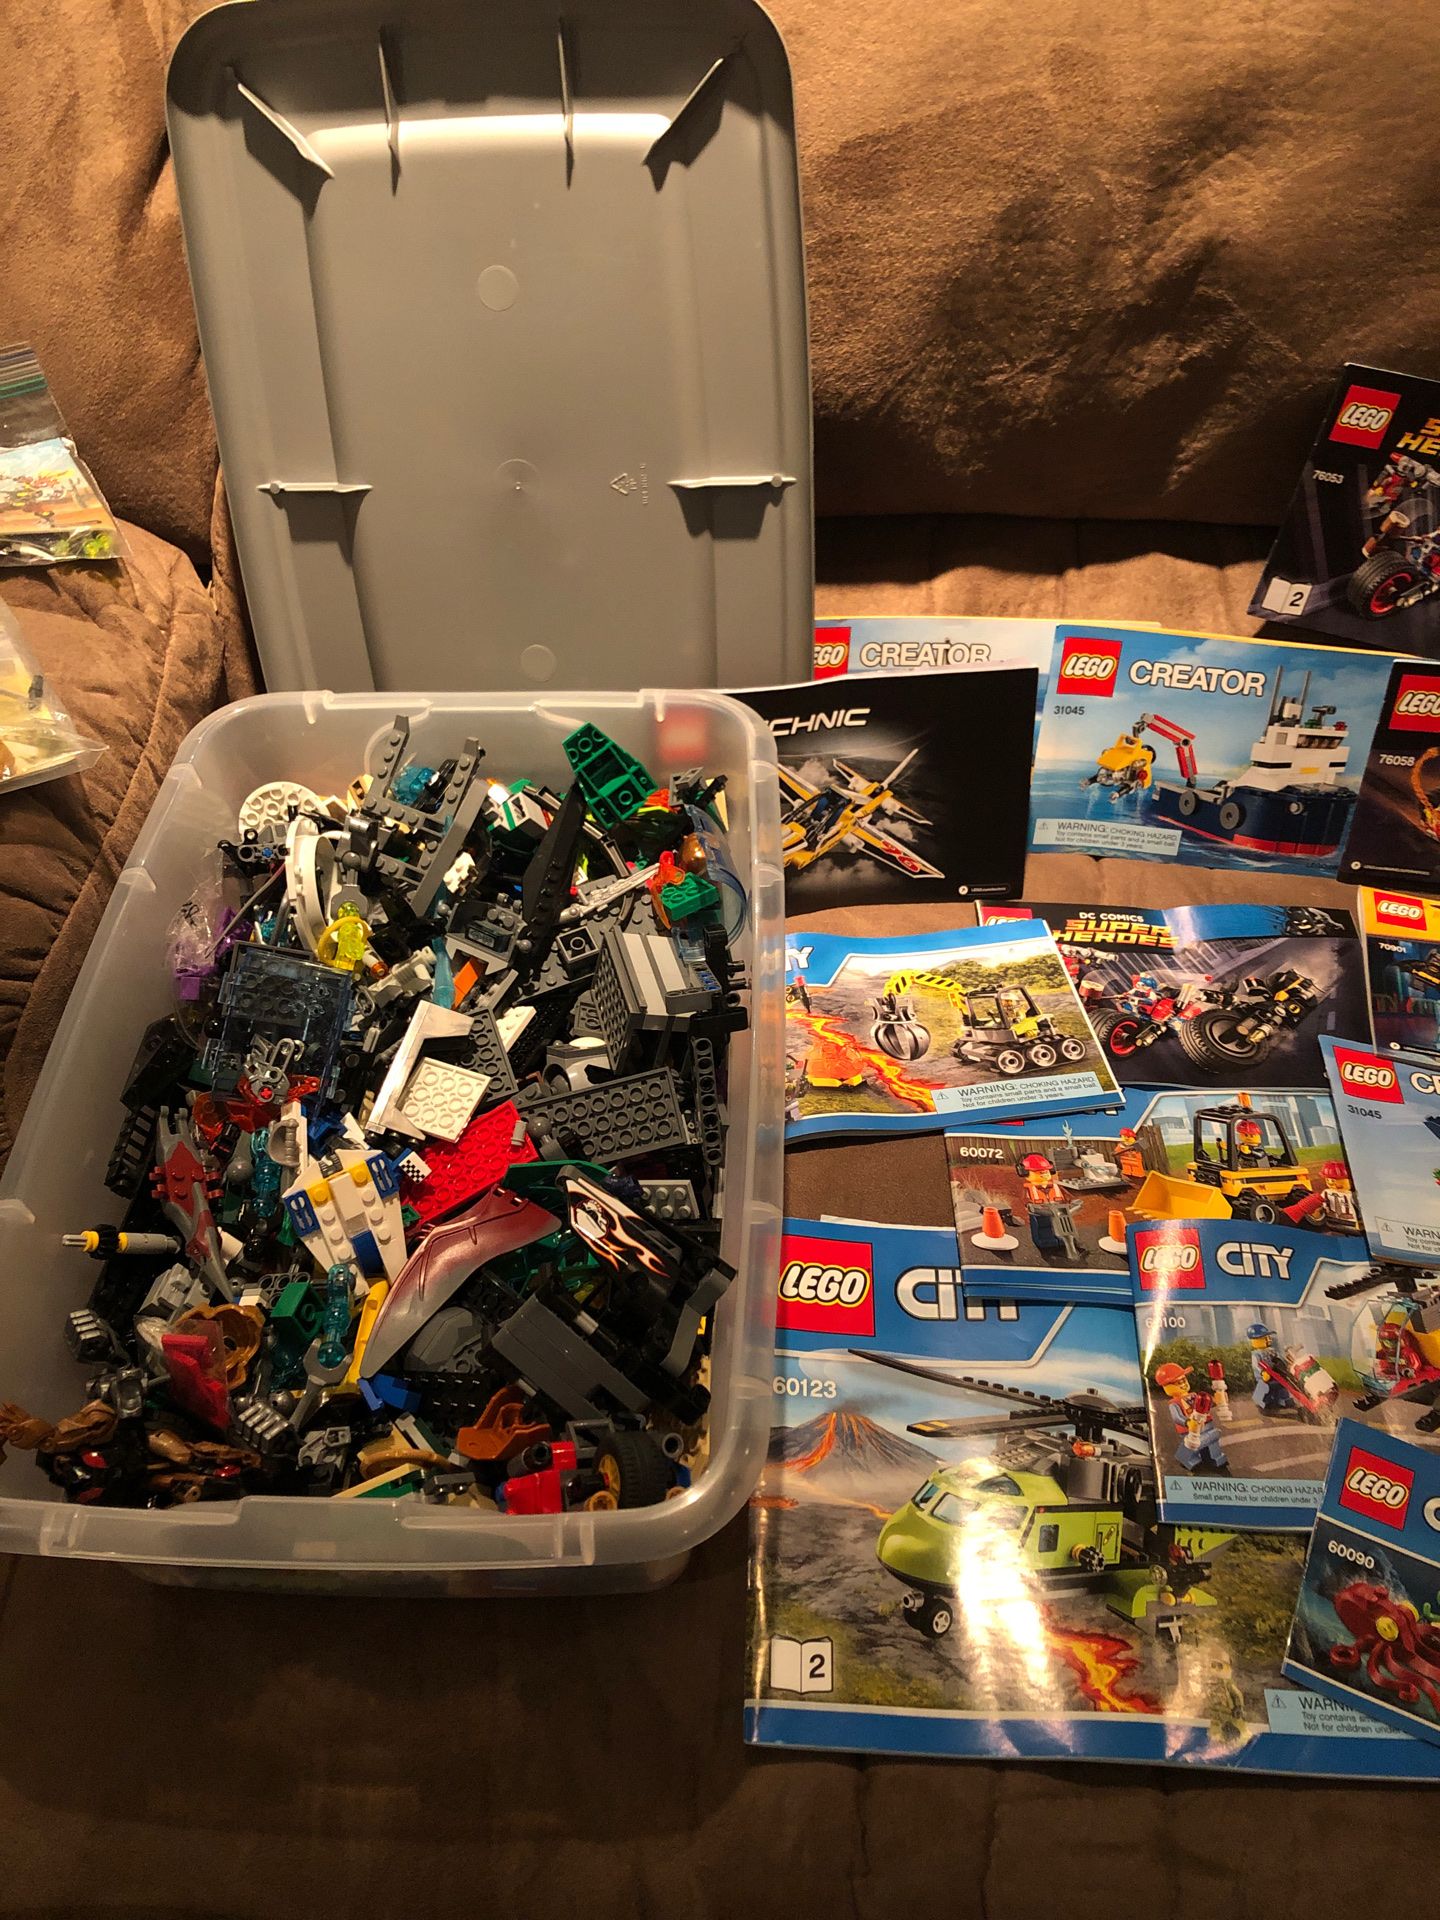 Over 30 LEGO sets and Manuals